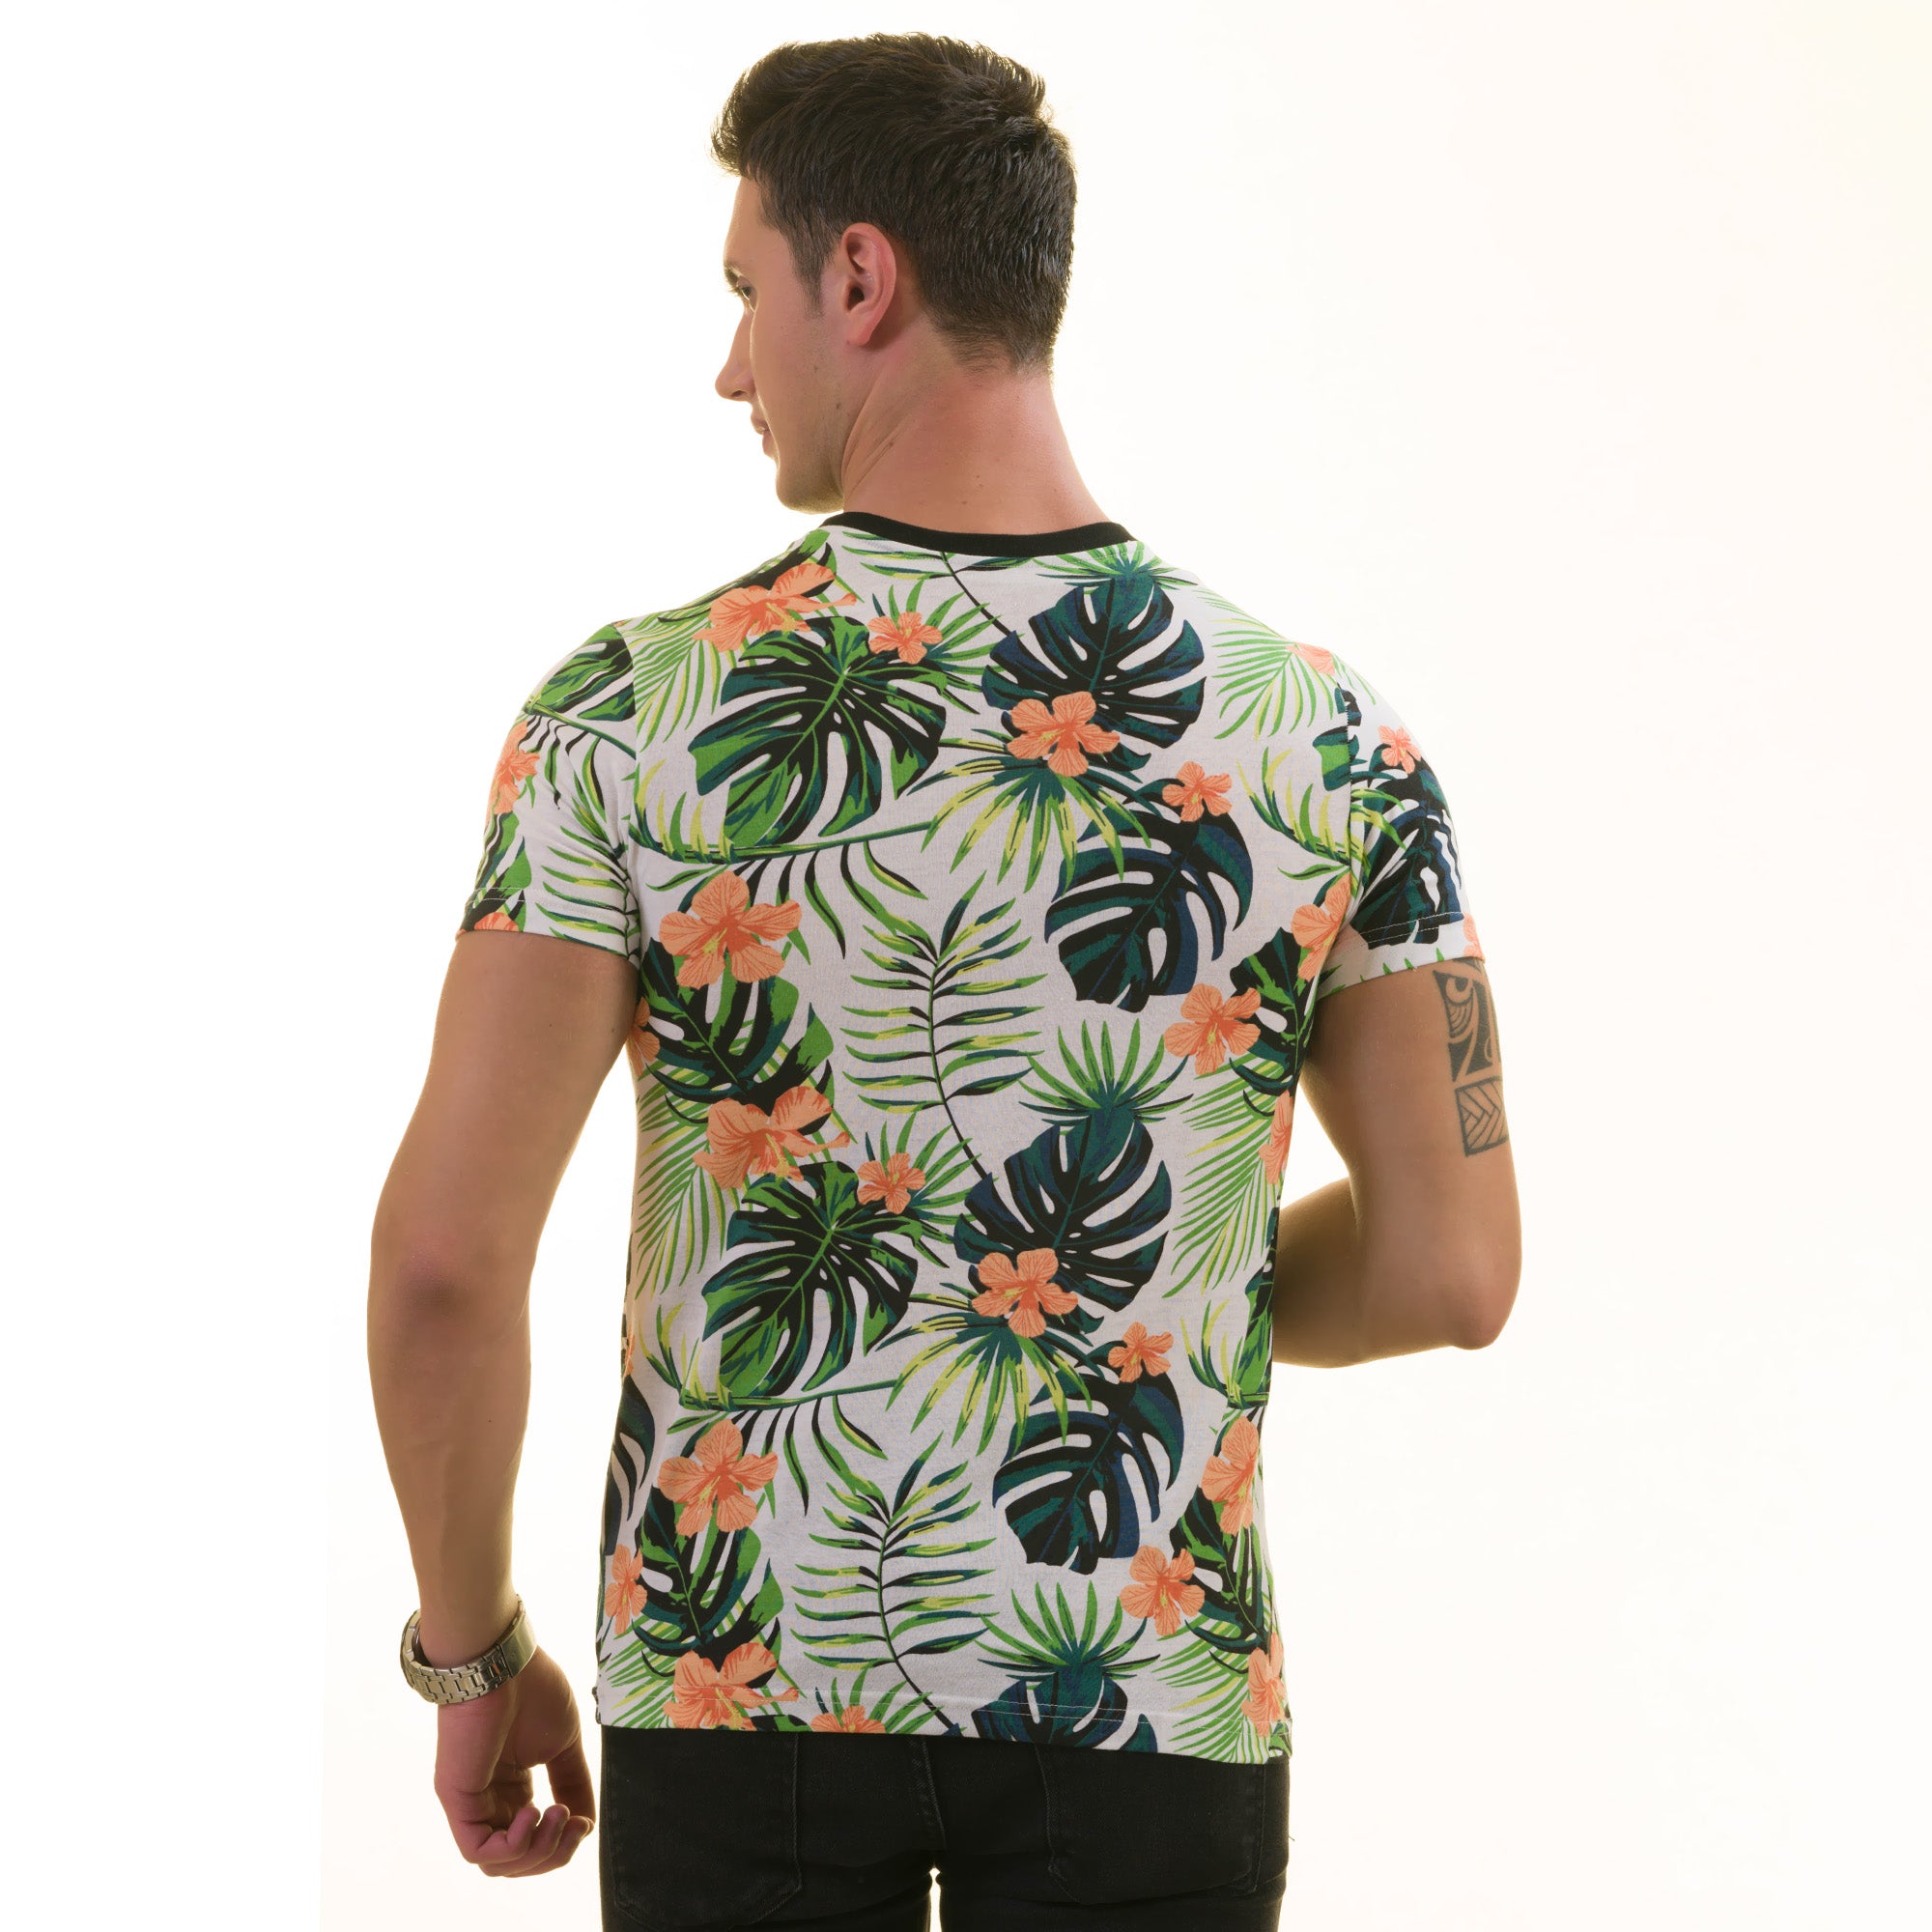 Orange Floral with Leaves European Made Premium Quality T-Shirt - Crew Neck Short Sleeve T-Shirts